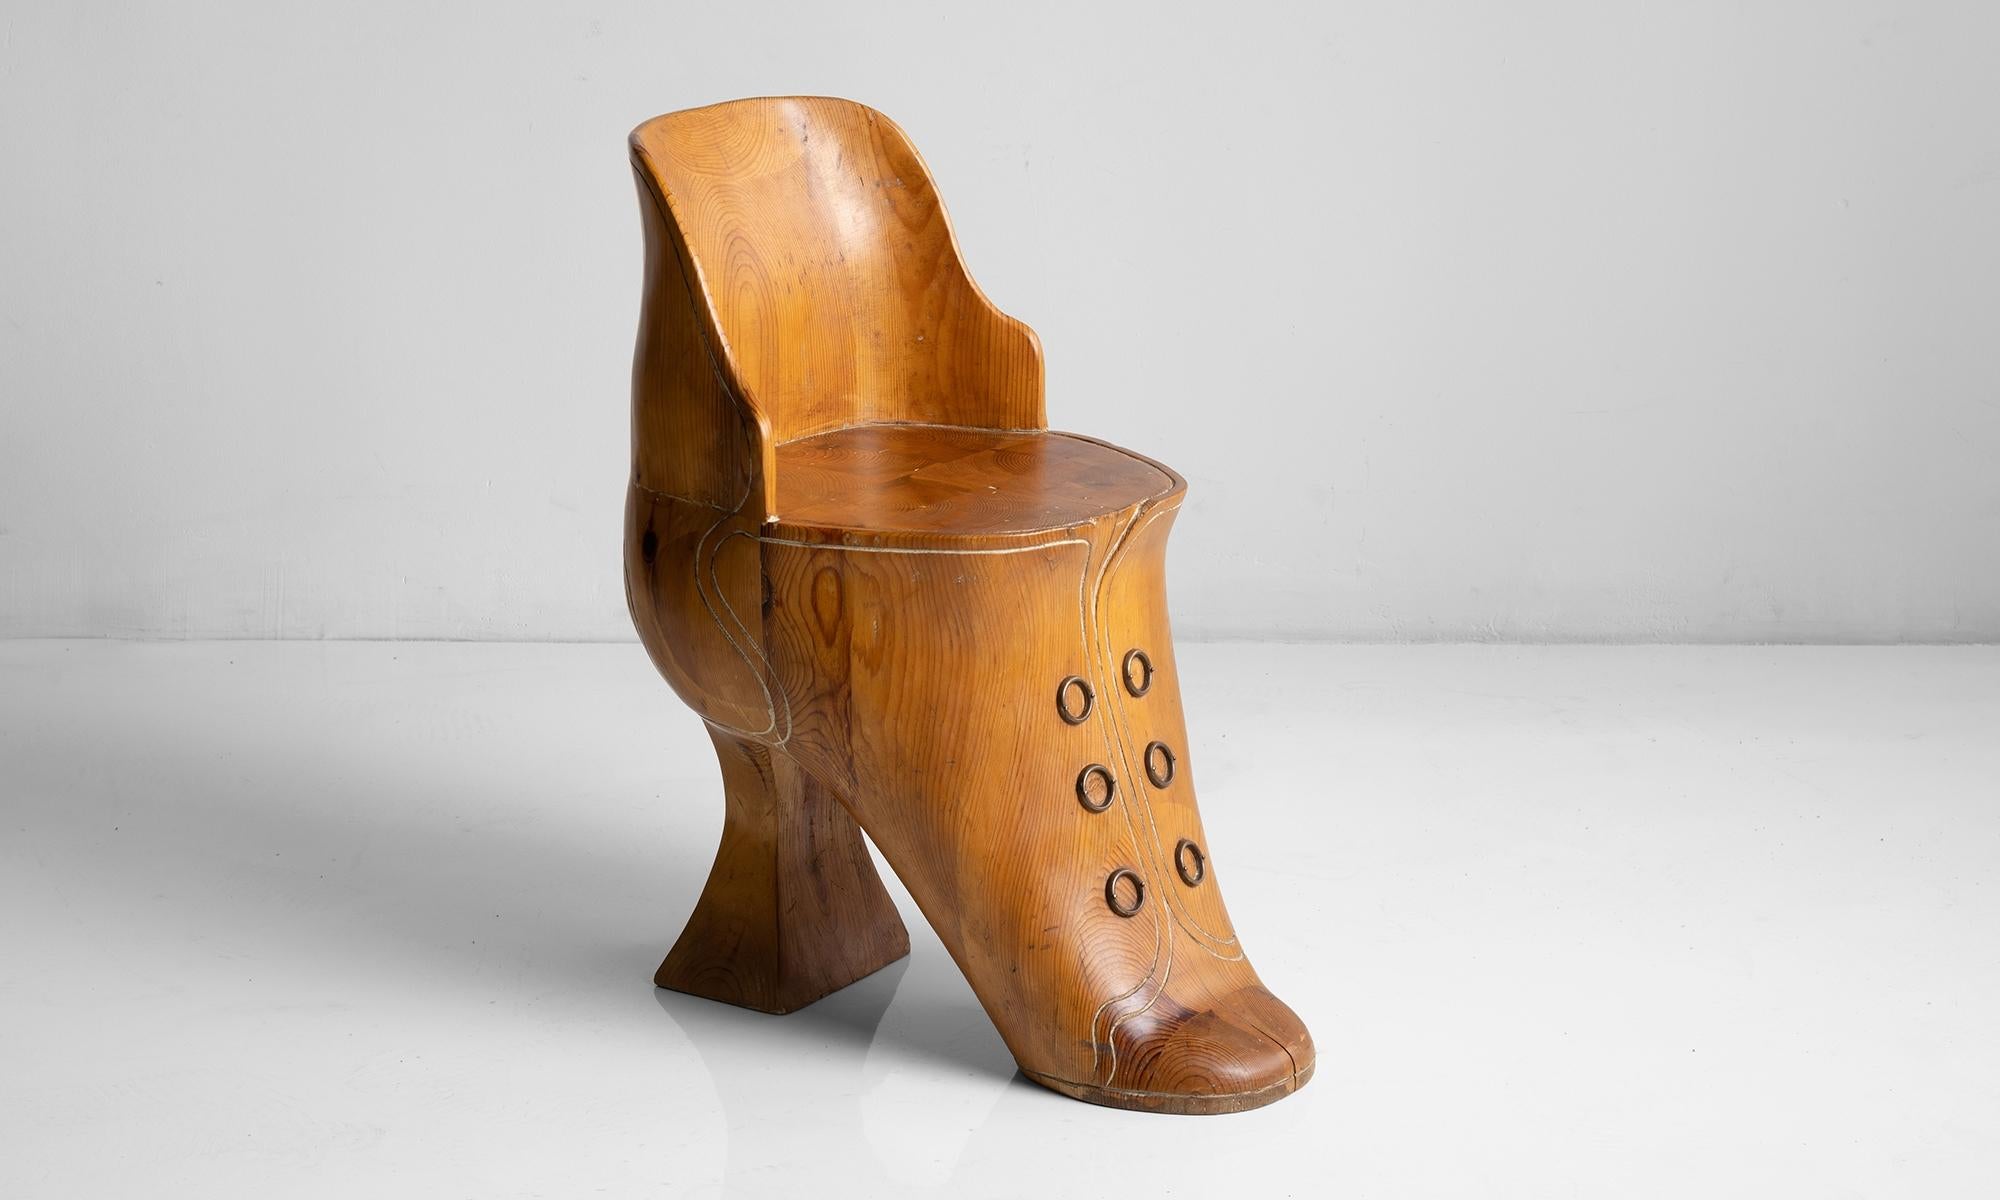 Unique pine shoe chair
Italy circa 1930
High heeled shoe carved from pine, with brass details
20.5”w x 14.5”d x 25.75”h x 16”seat.